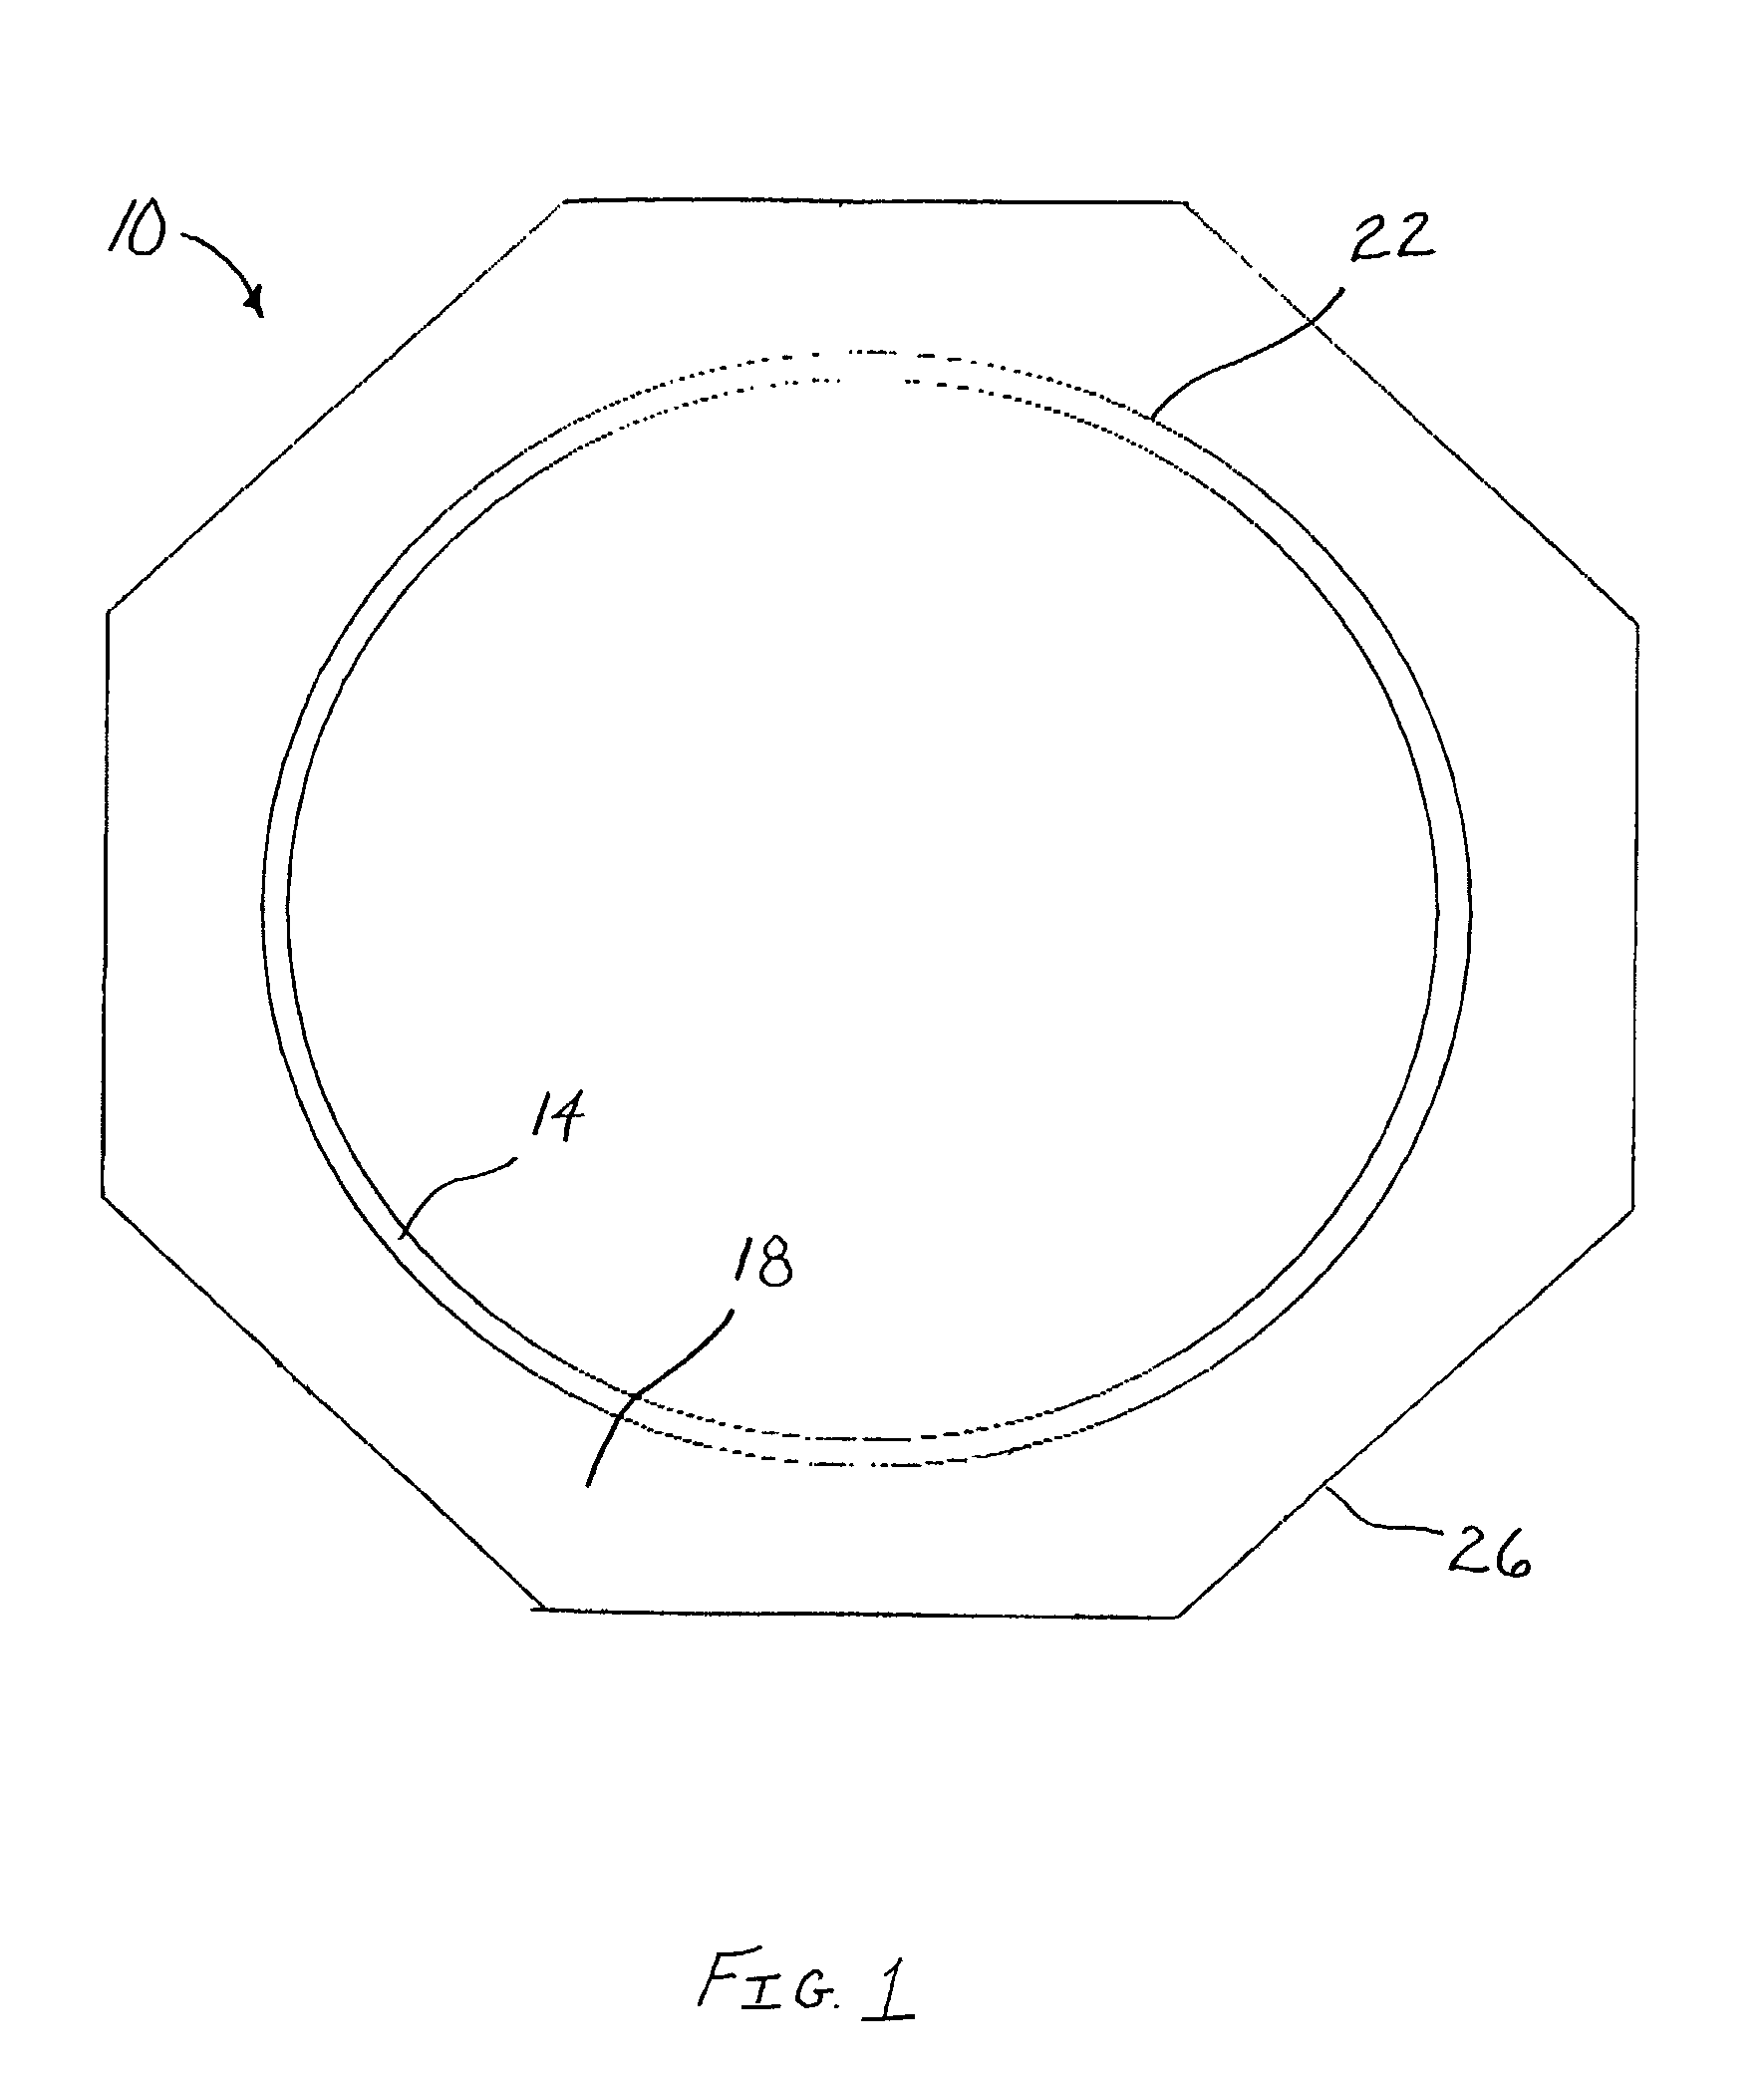 Method of manufacturing composite utility poles